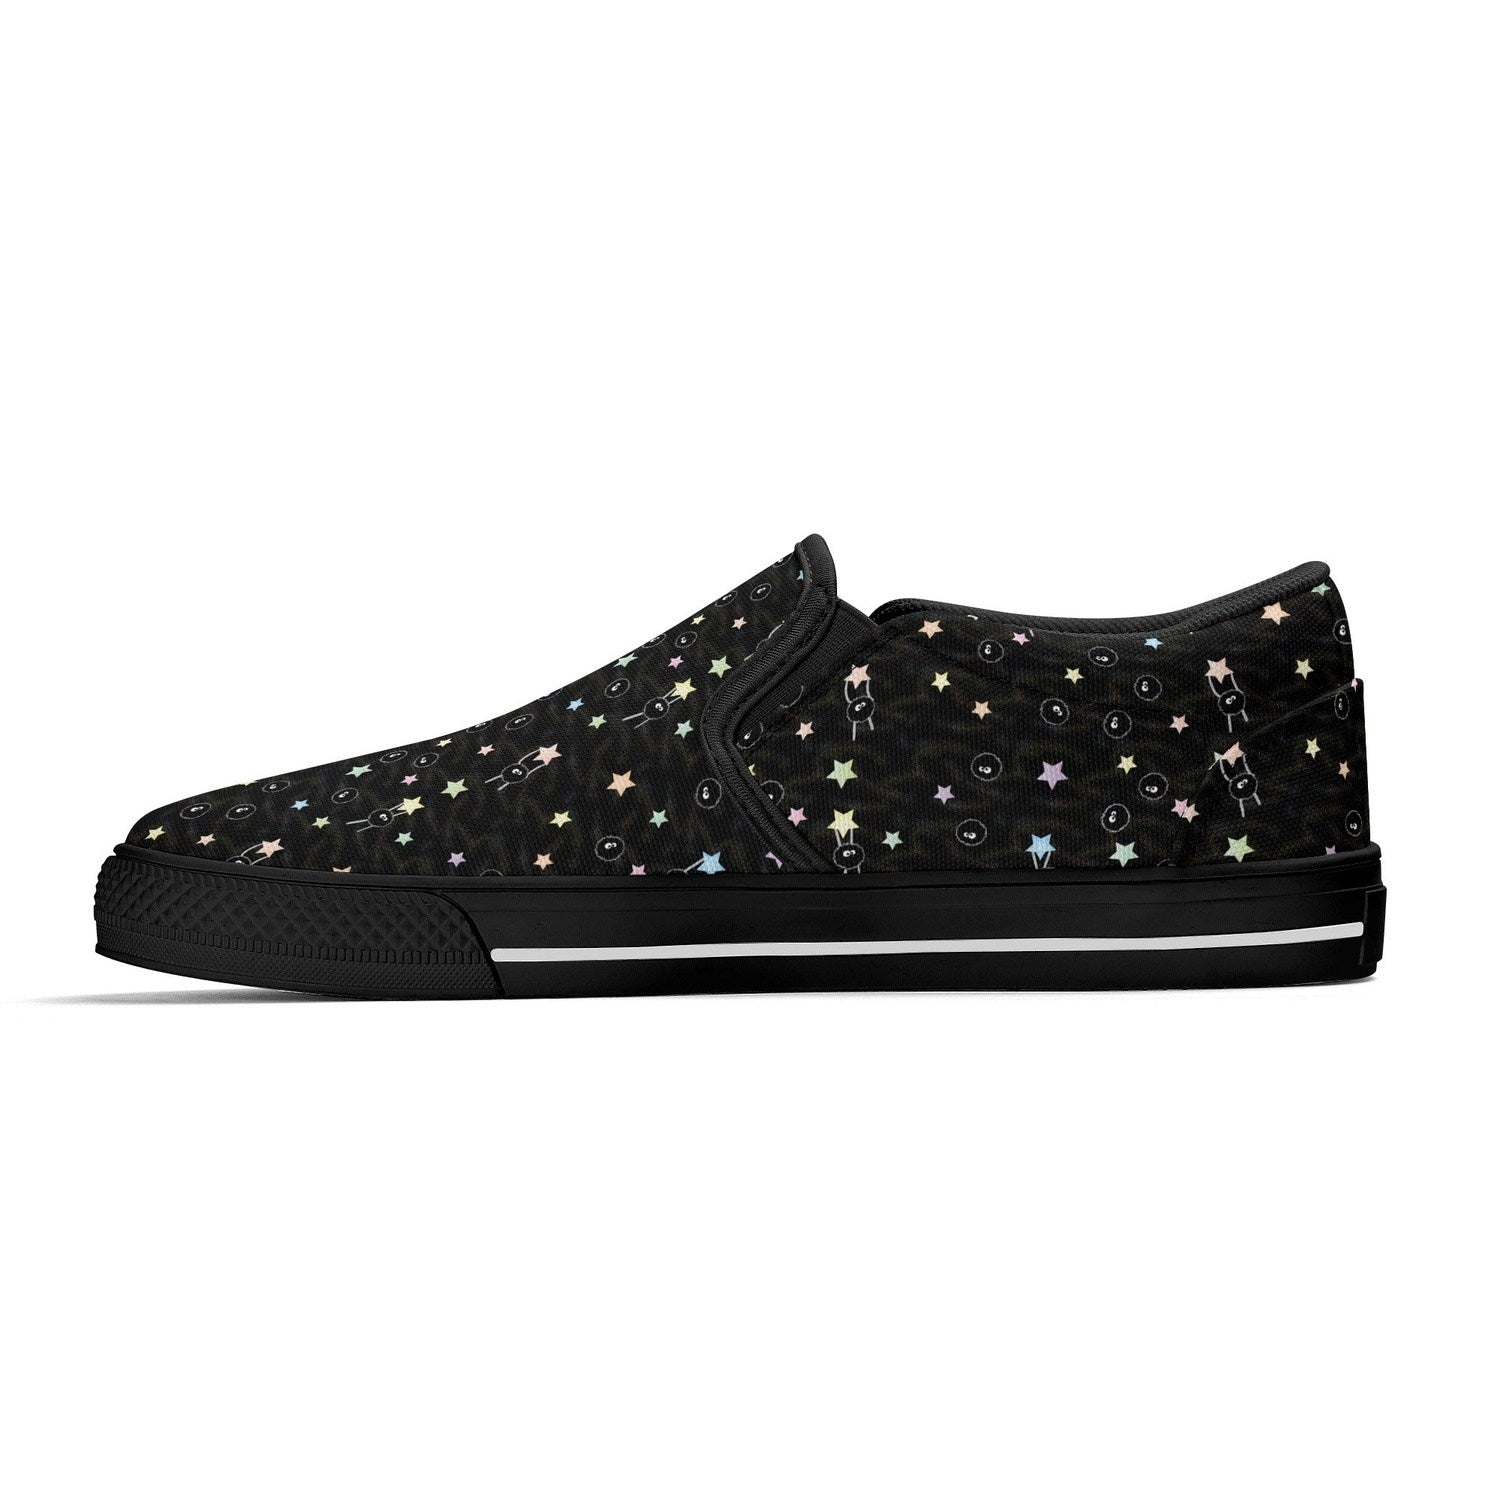 Soot Women's Slip On Shoes